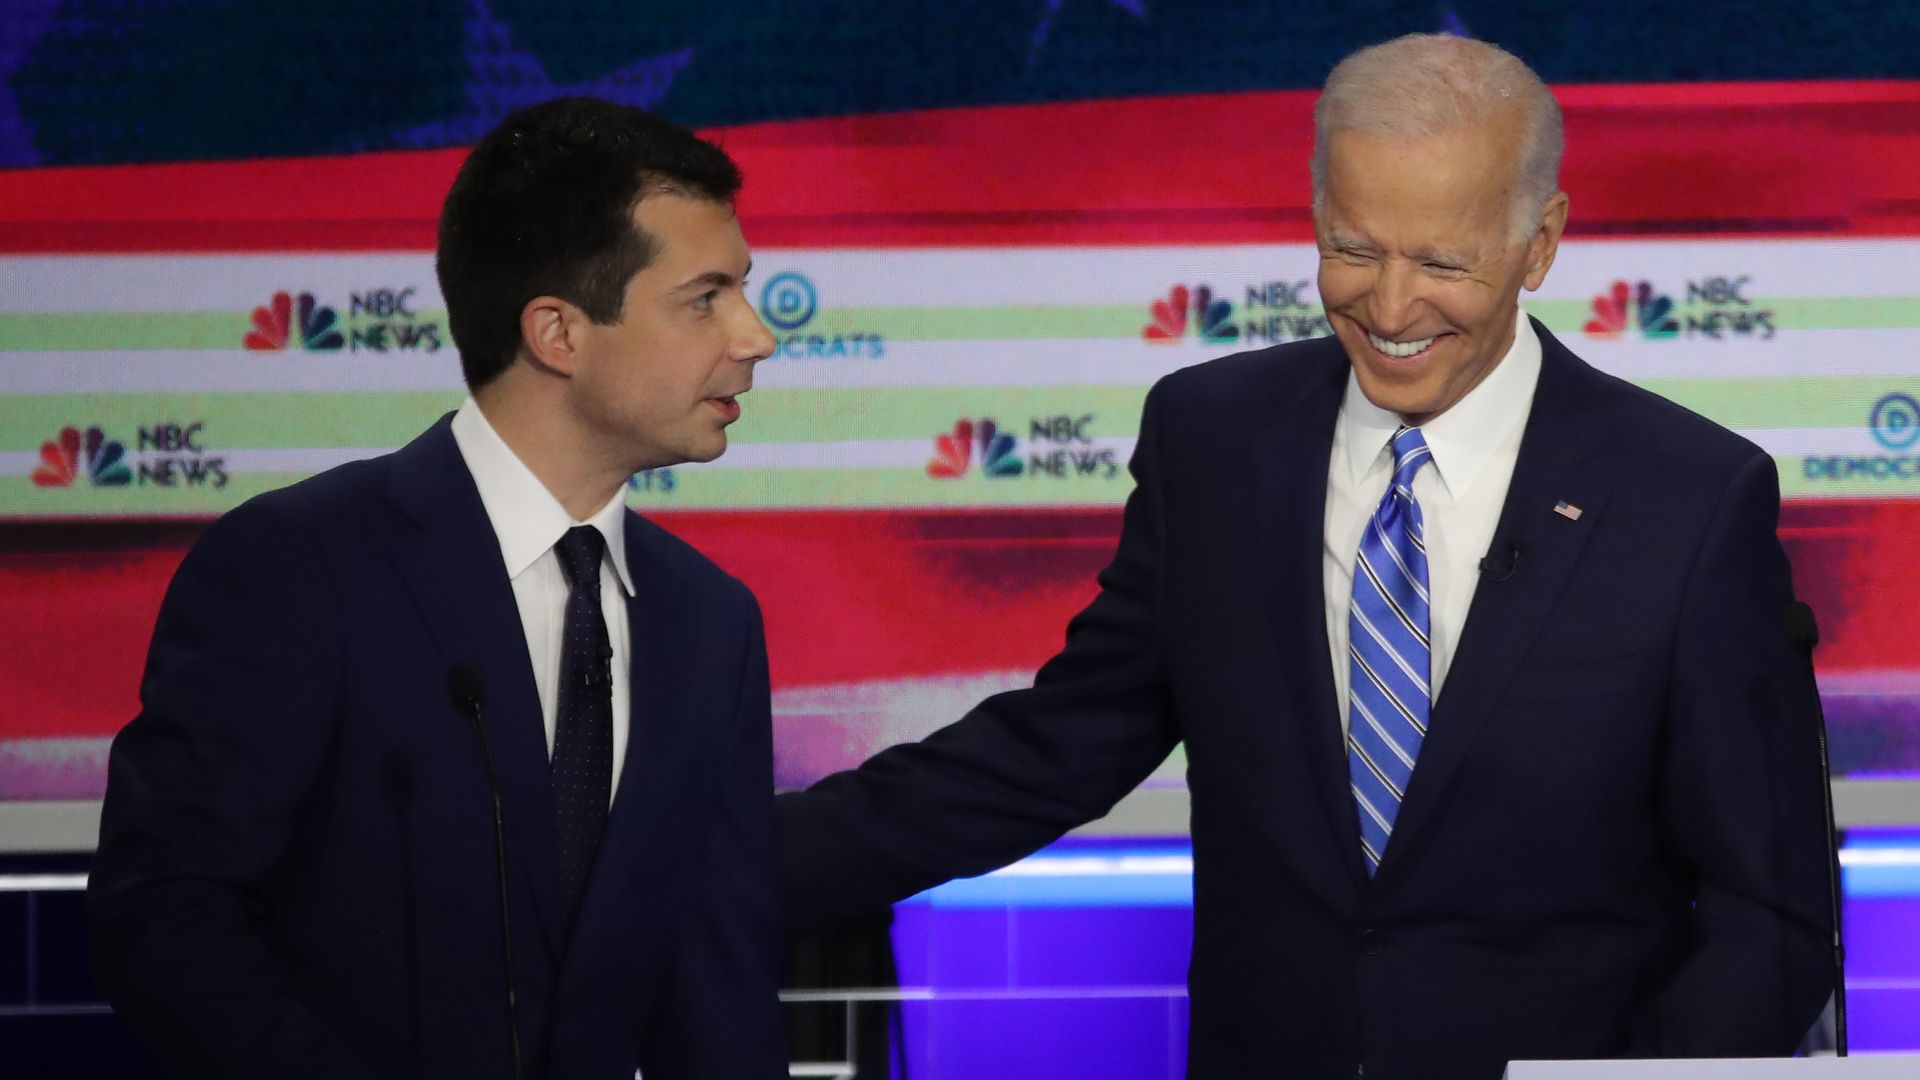 South Bend, Indiana Mayor Pete Buttigieg (L) and former Vice President Joe Biden talk during the second night of the first Democratic presidential debate on June 27, 2019 in Miami